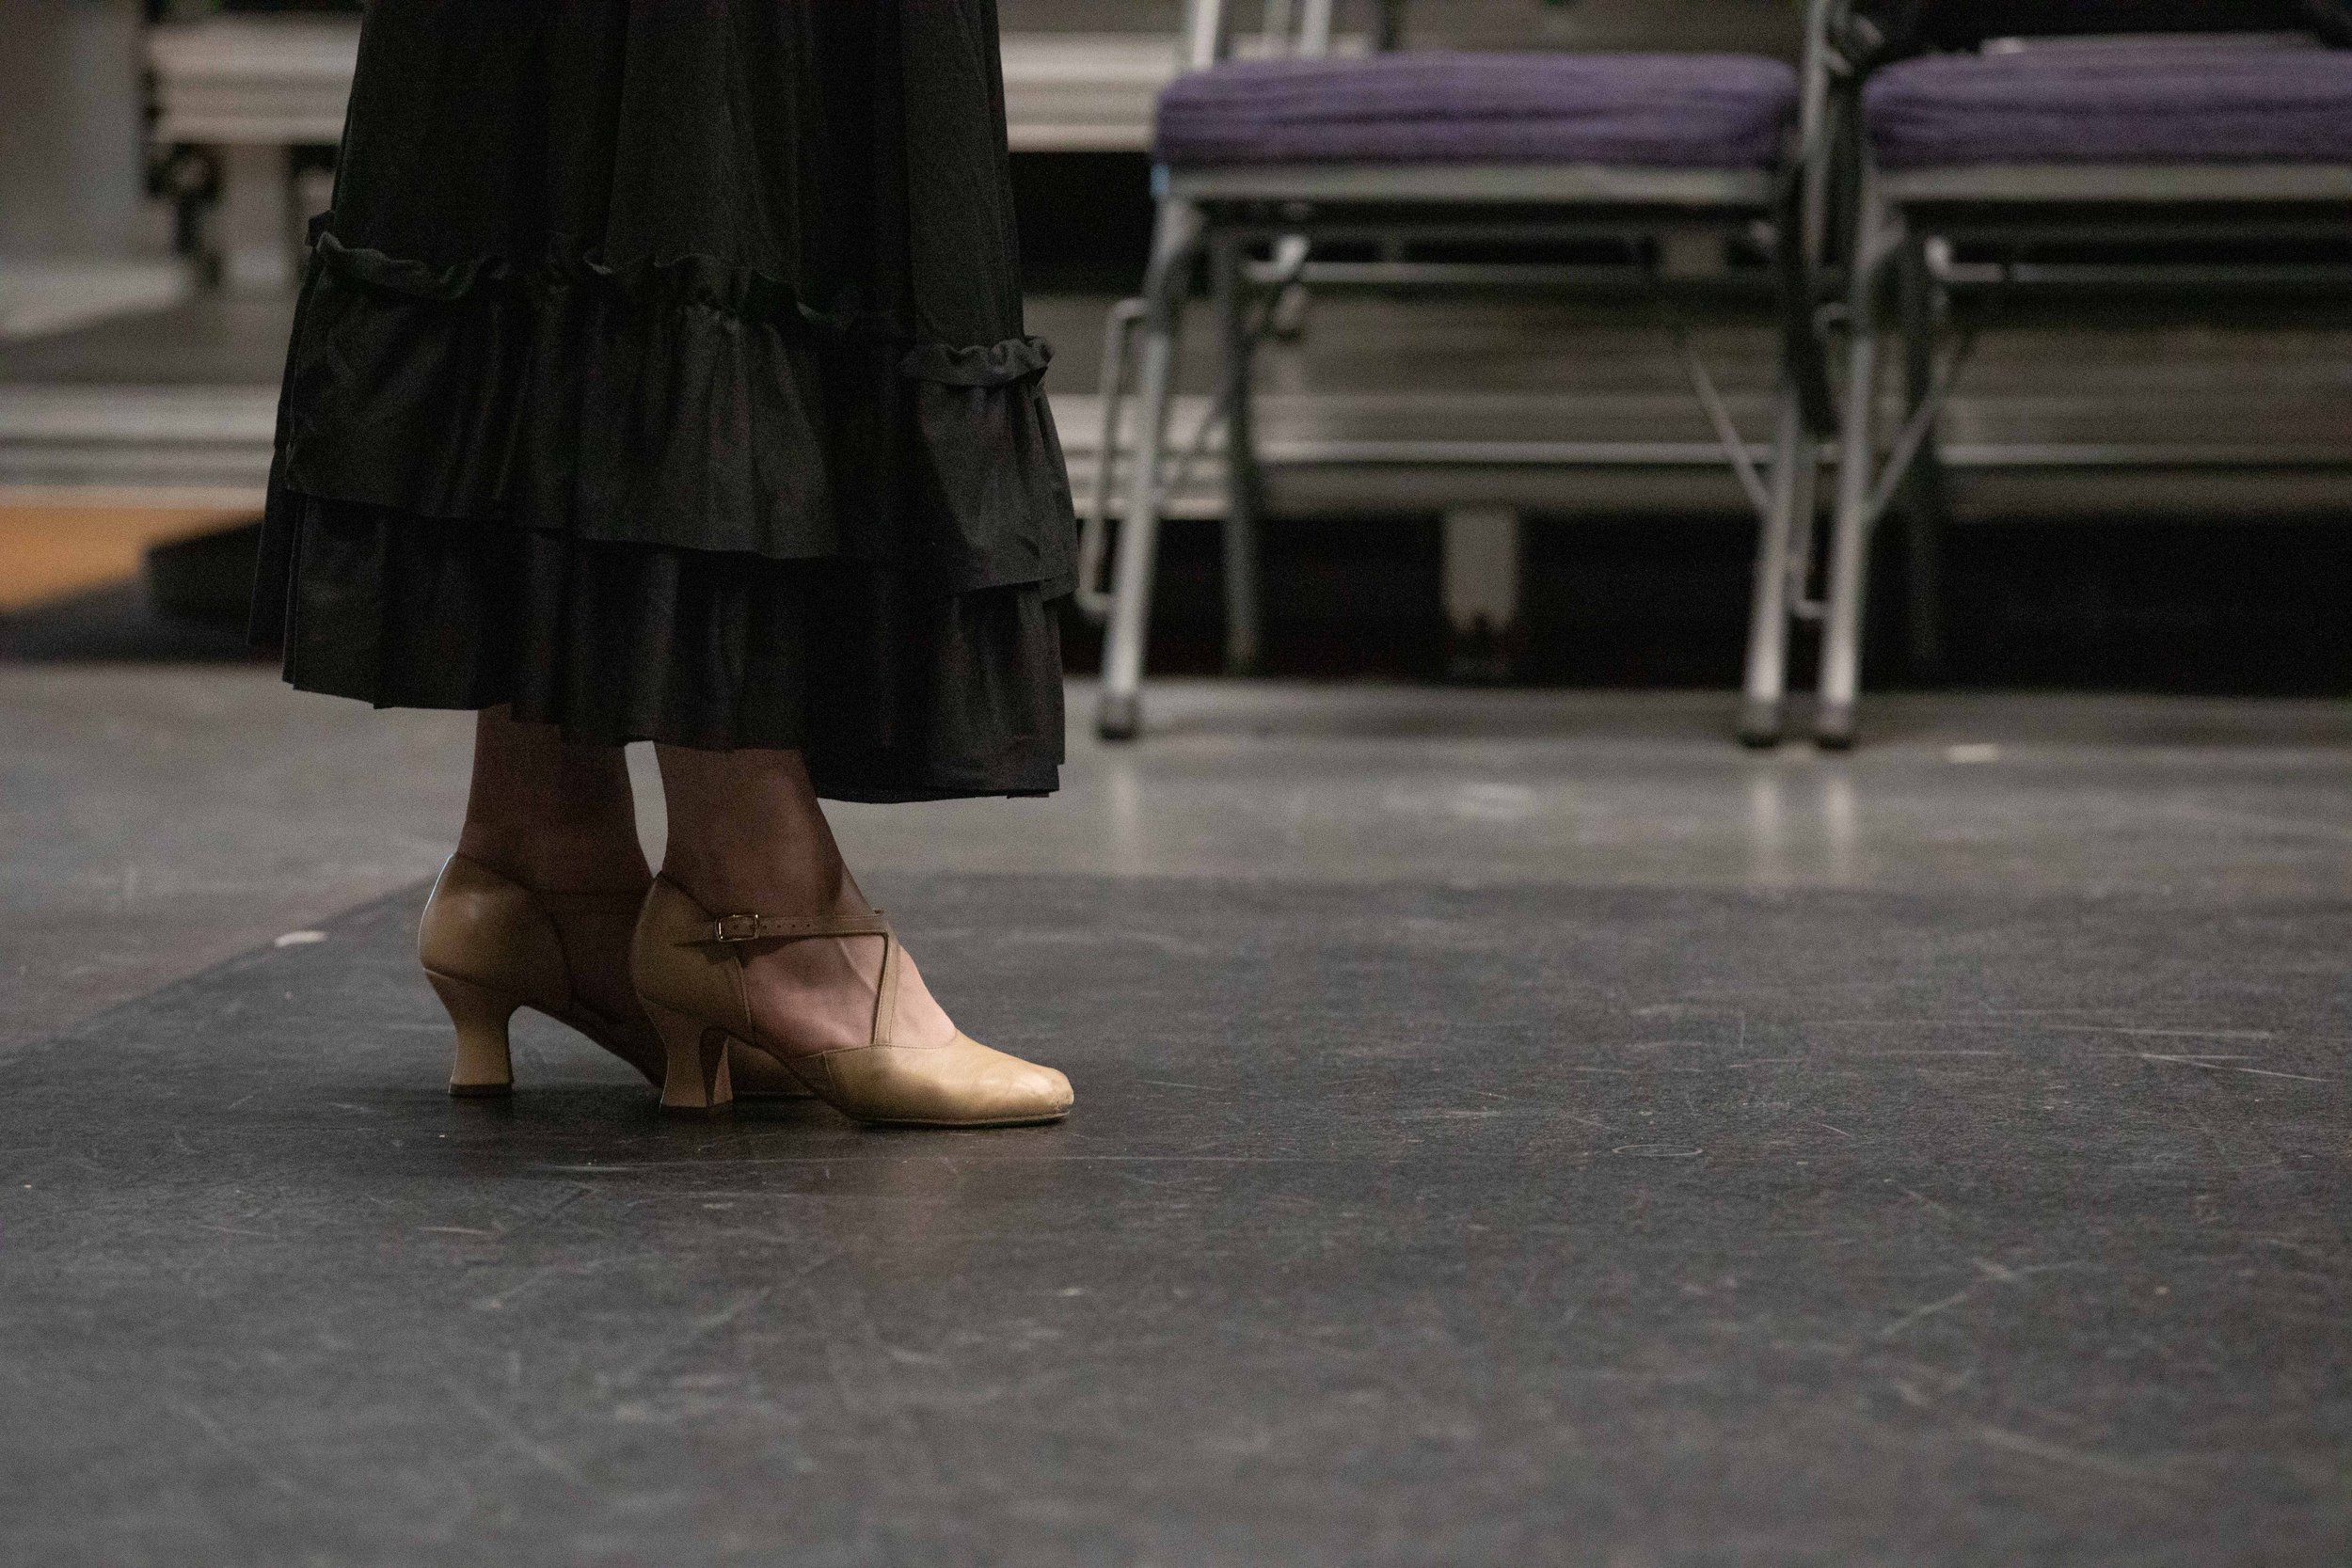  A detail of the Flamenco dance shoes used for one of the SMC students at a class rehearsal for the musical “Hunchback of Notredame”. Theater Arts building at SMC main campus, Santa Monica, Calif. March Tuesday 7, 2023. (Jorge Devotto | The Corsair) 